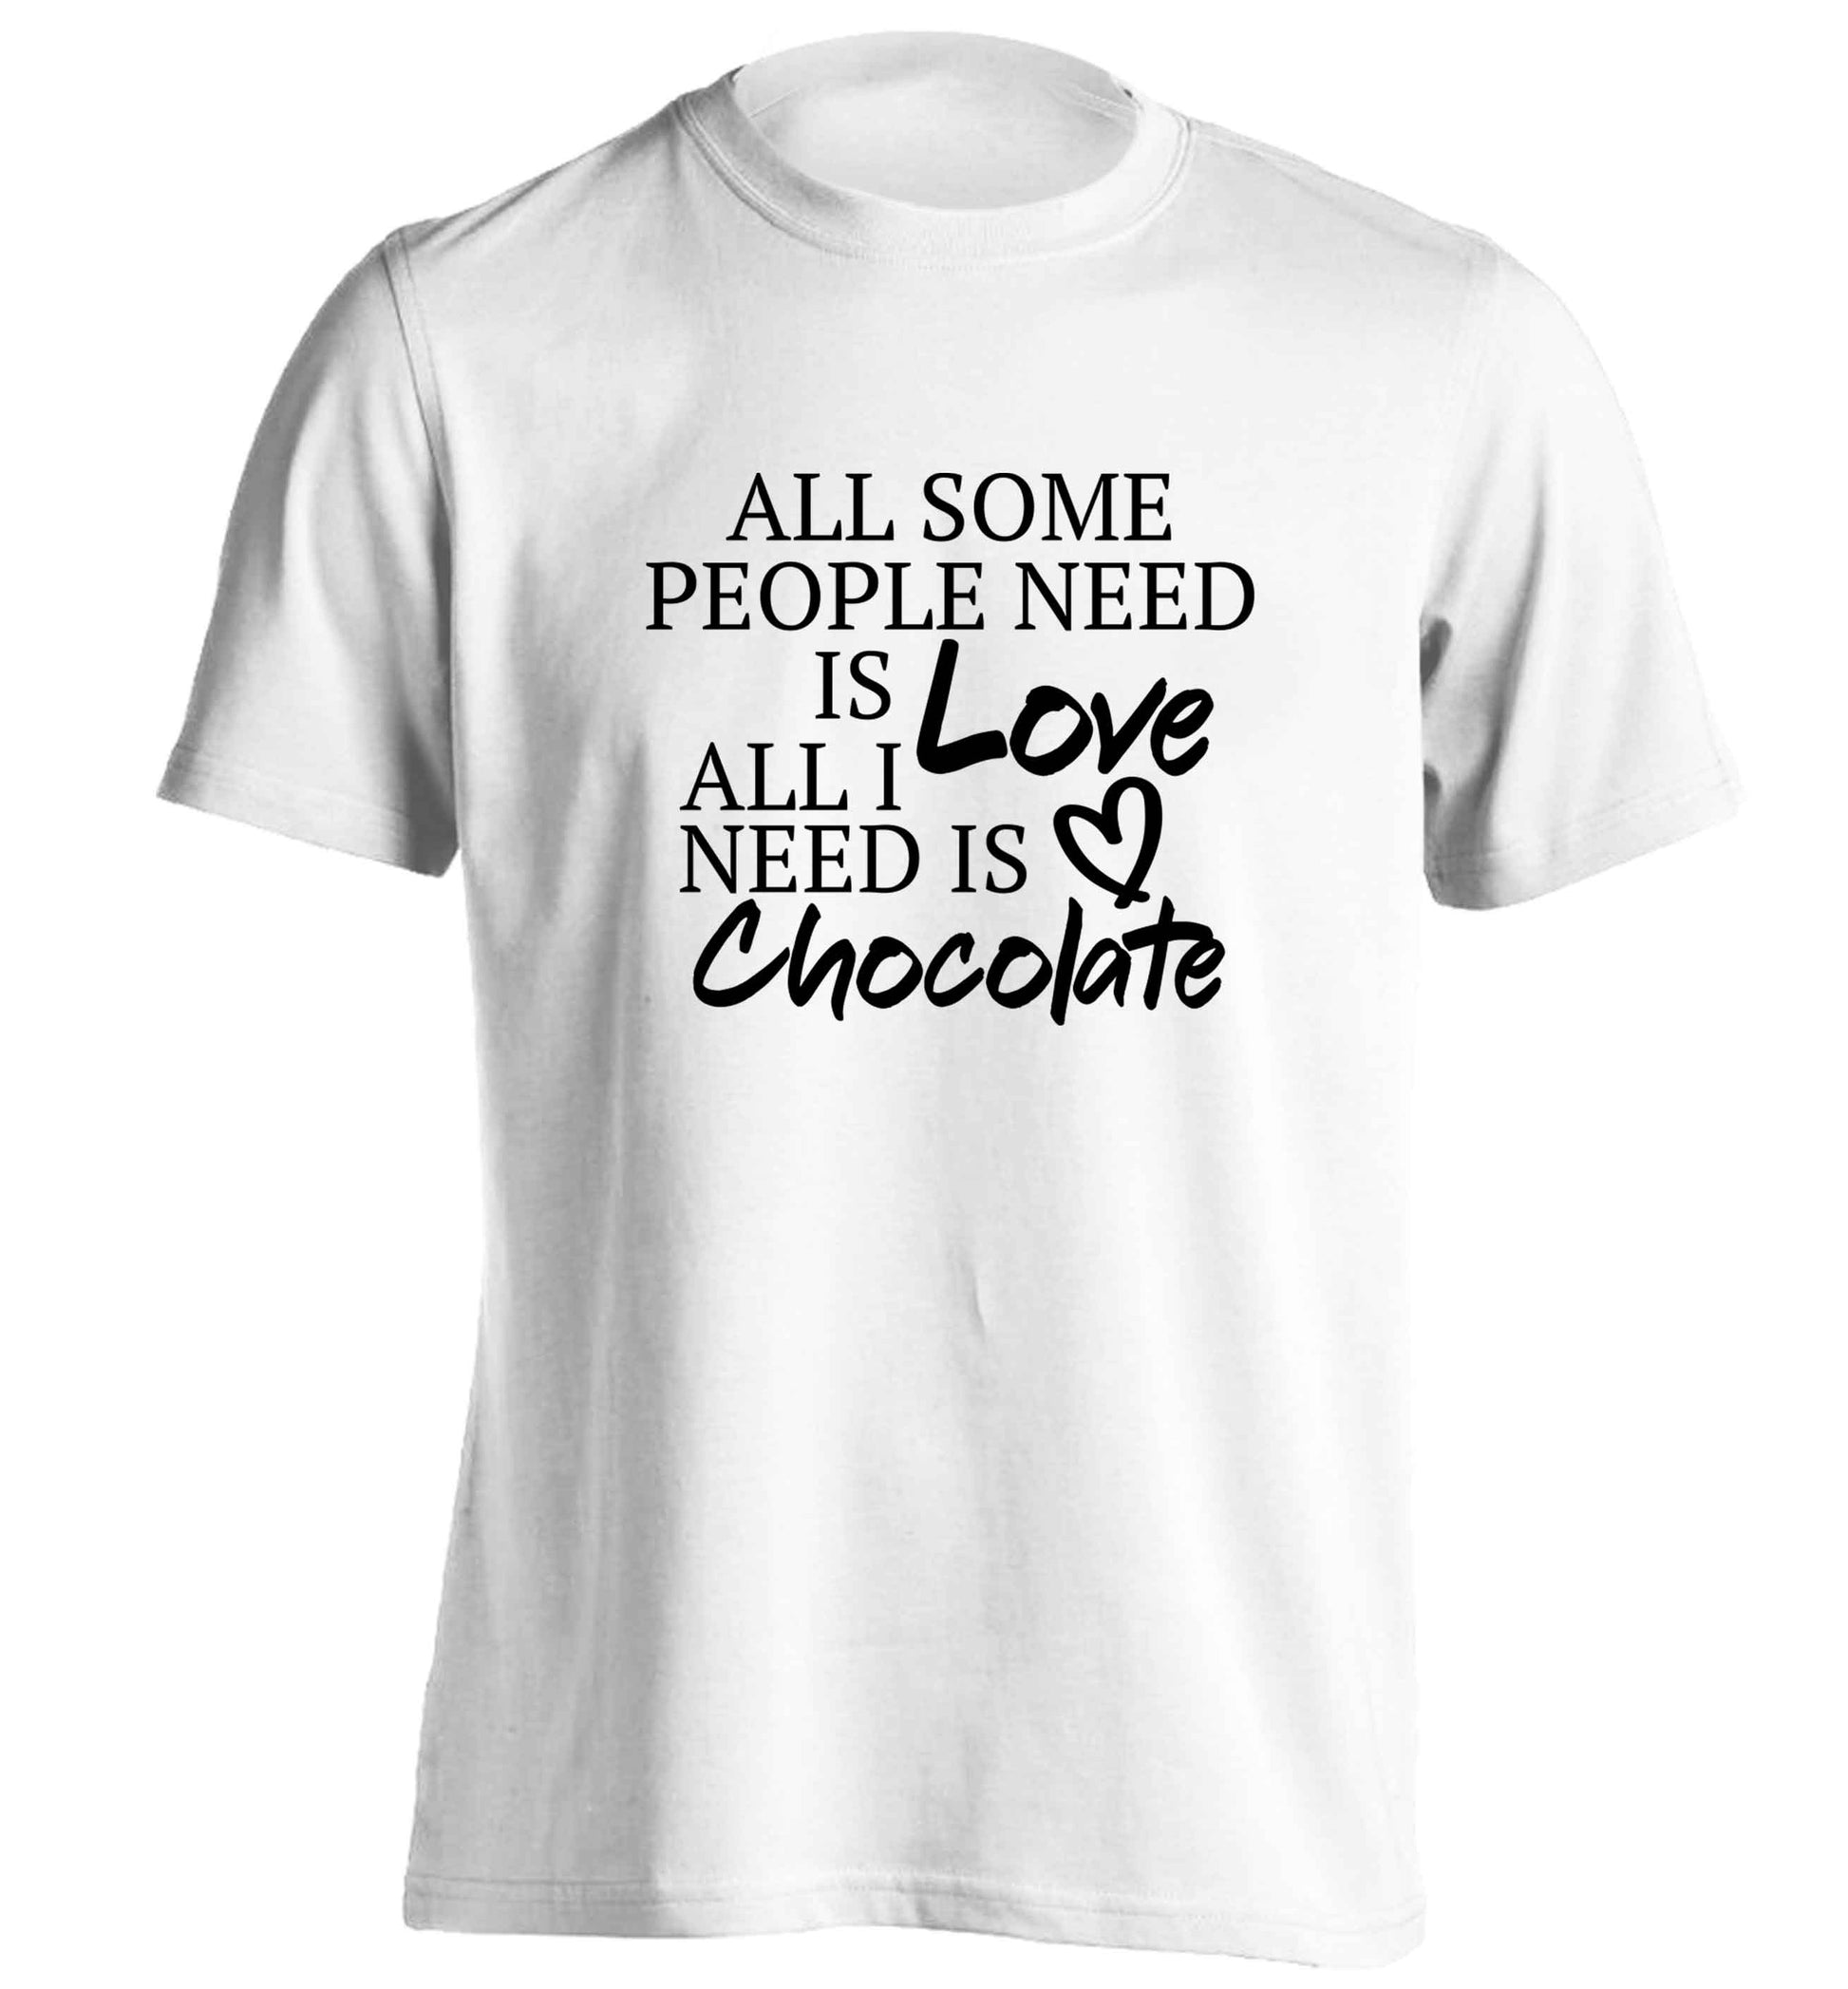 All some people need is love all I need is chocolate adults unisex white Tshirt 2XL